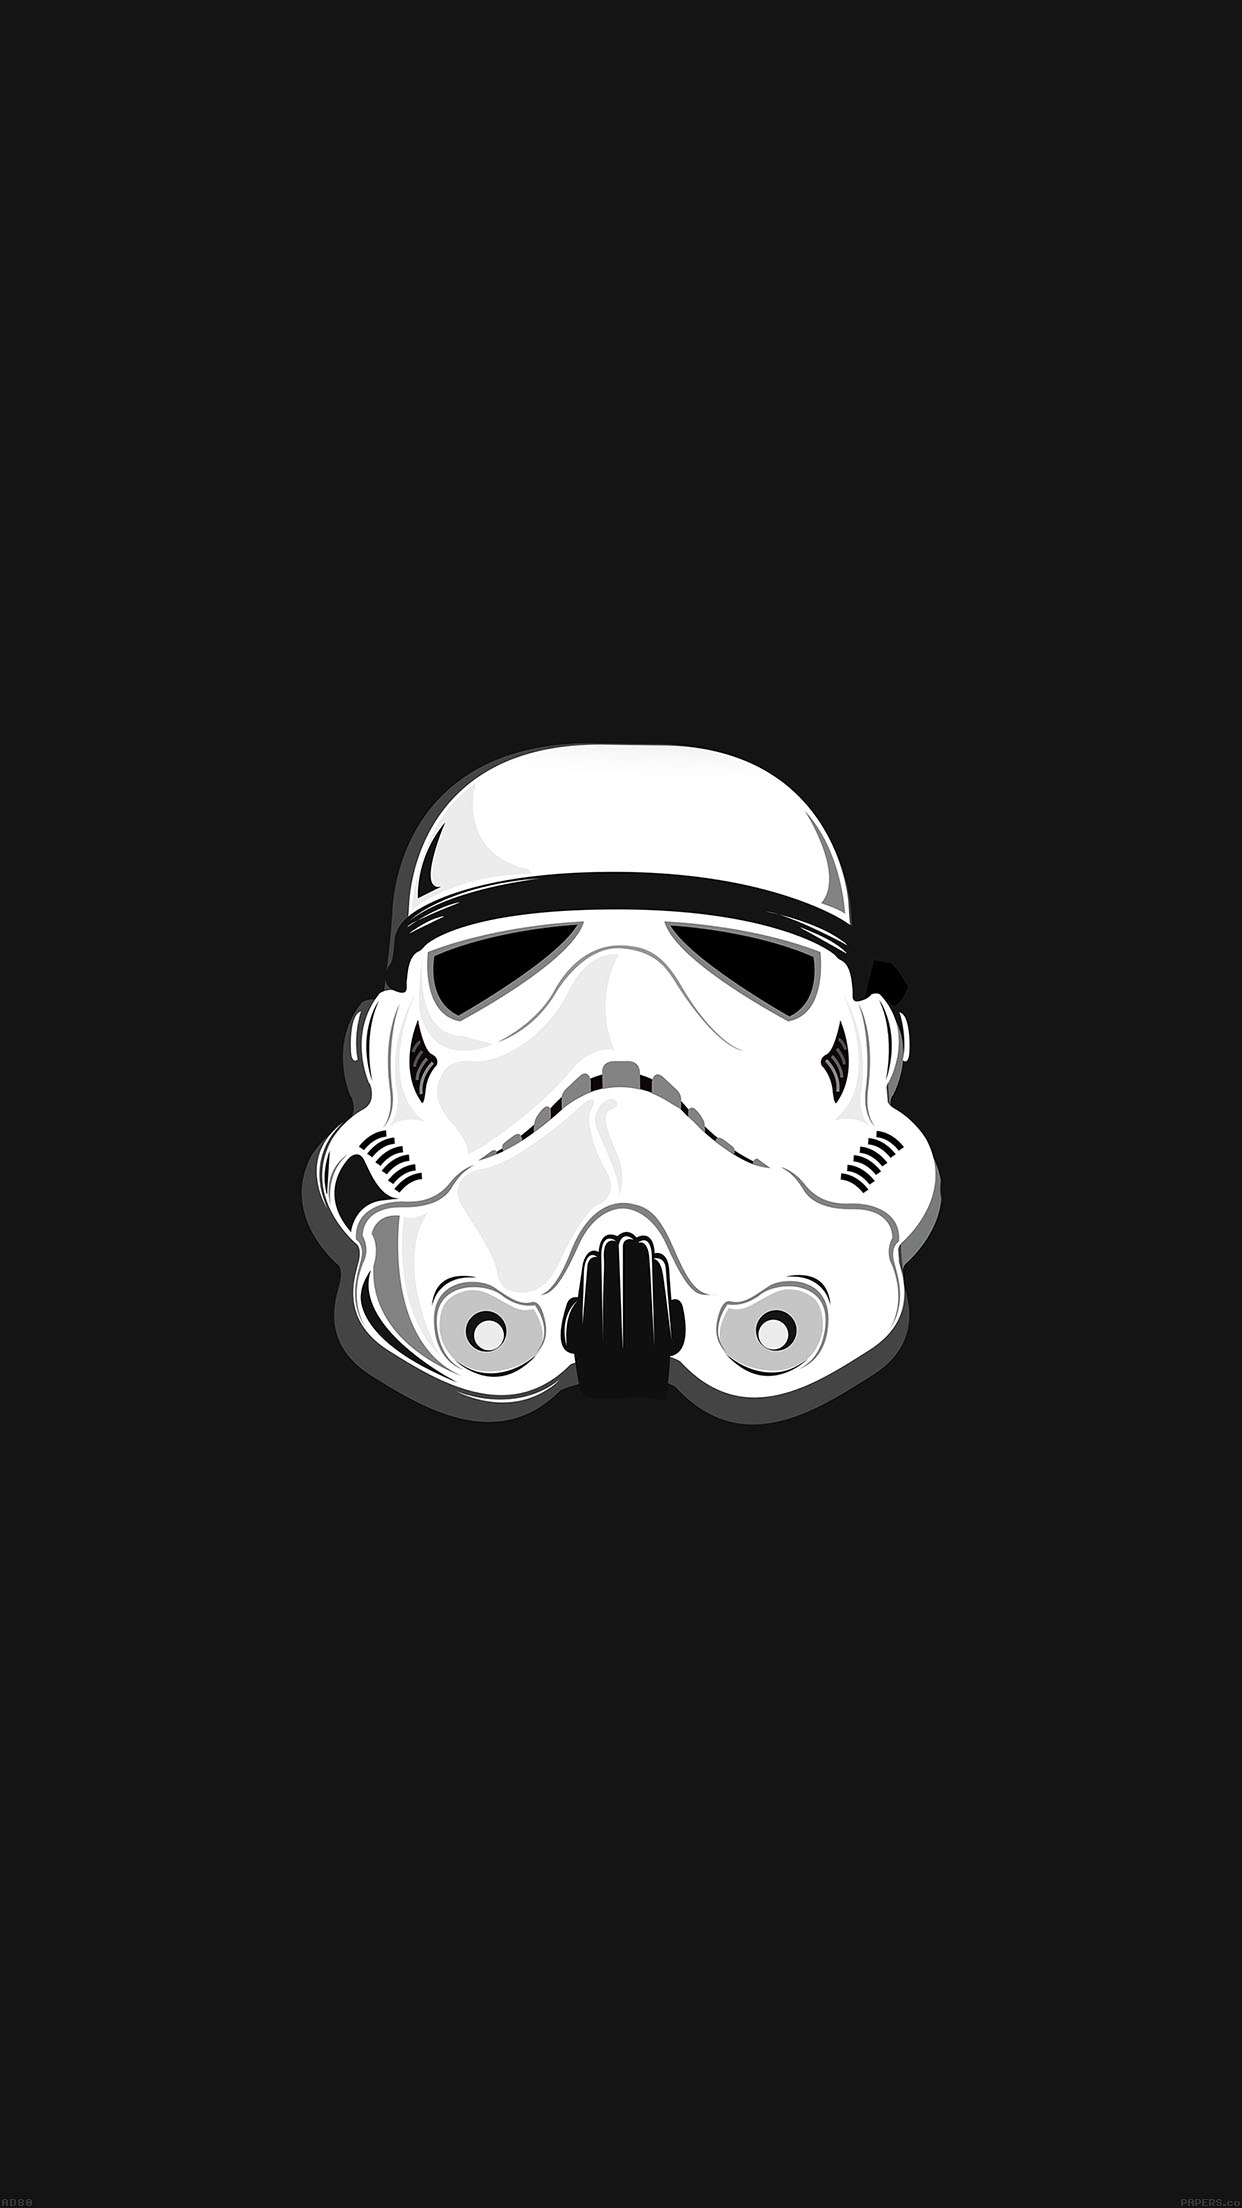 Star Wars Wallpaper For iPhone And iPad